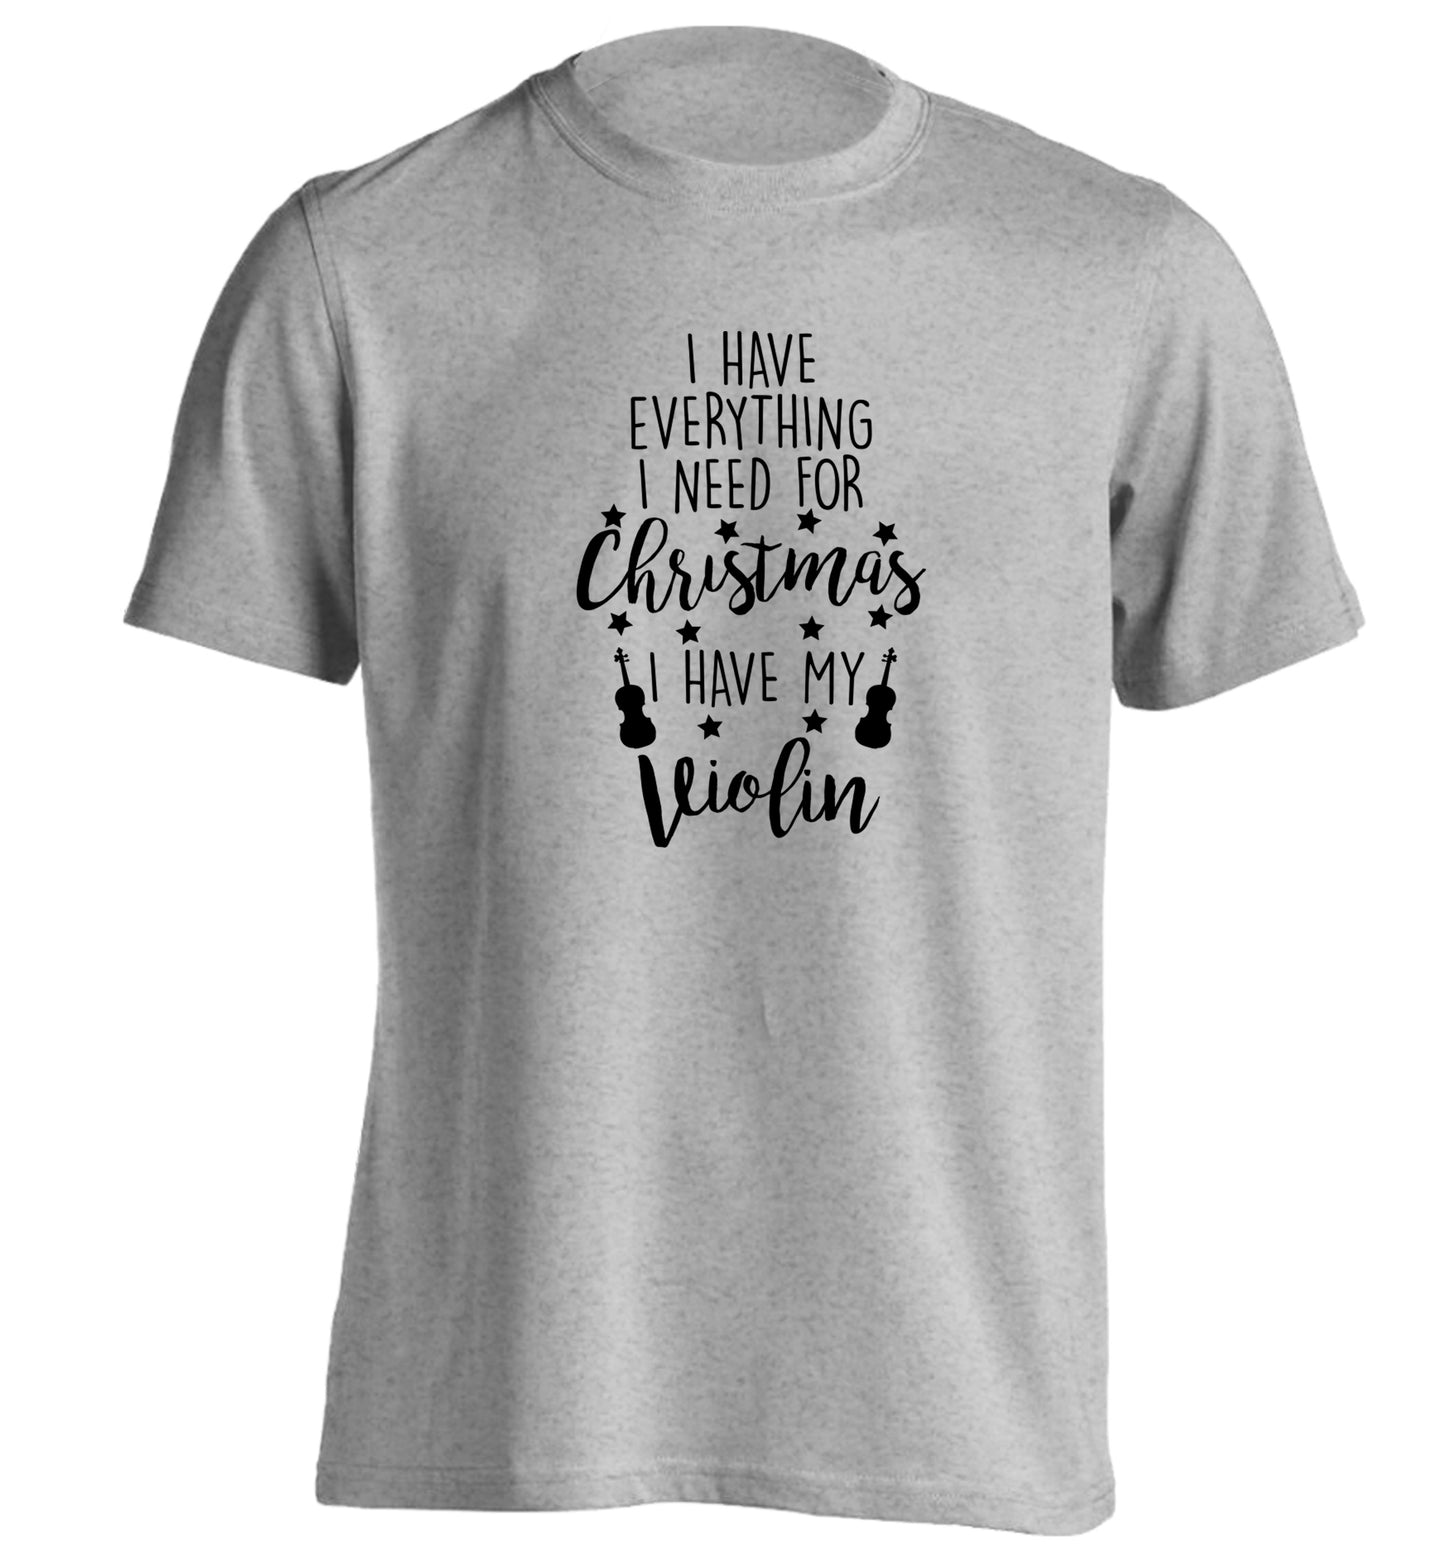 I have everything I need for Christmas I have my violin adults unisex grey Tshirt 2XL